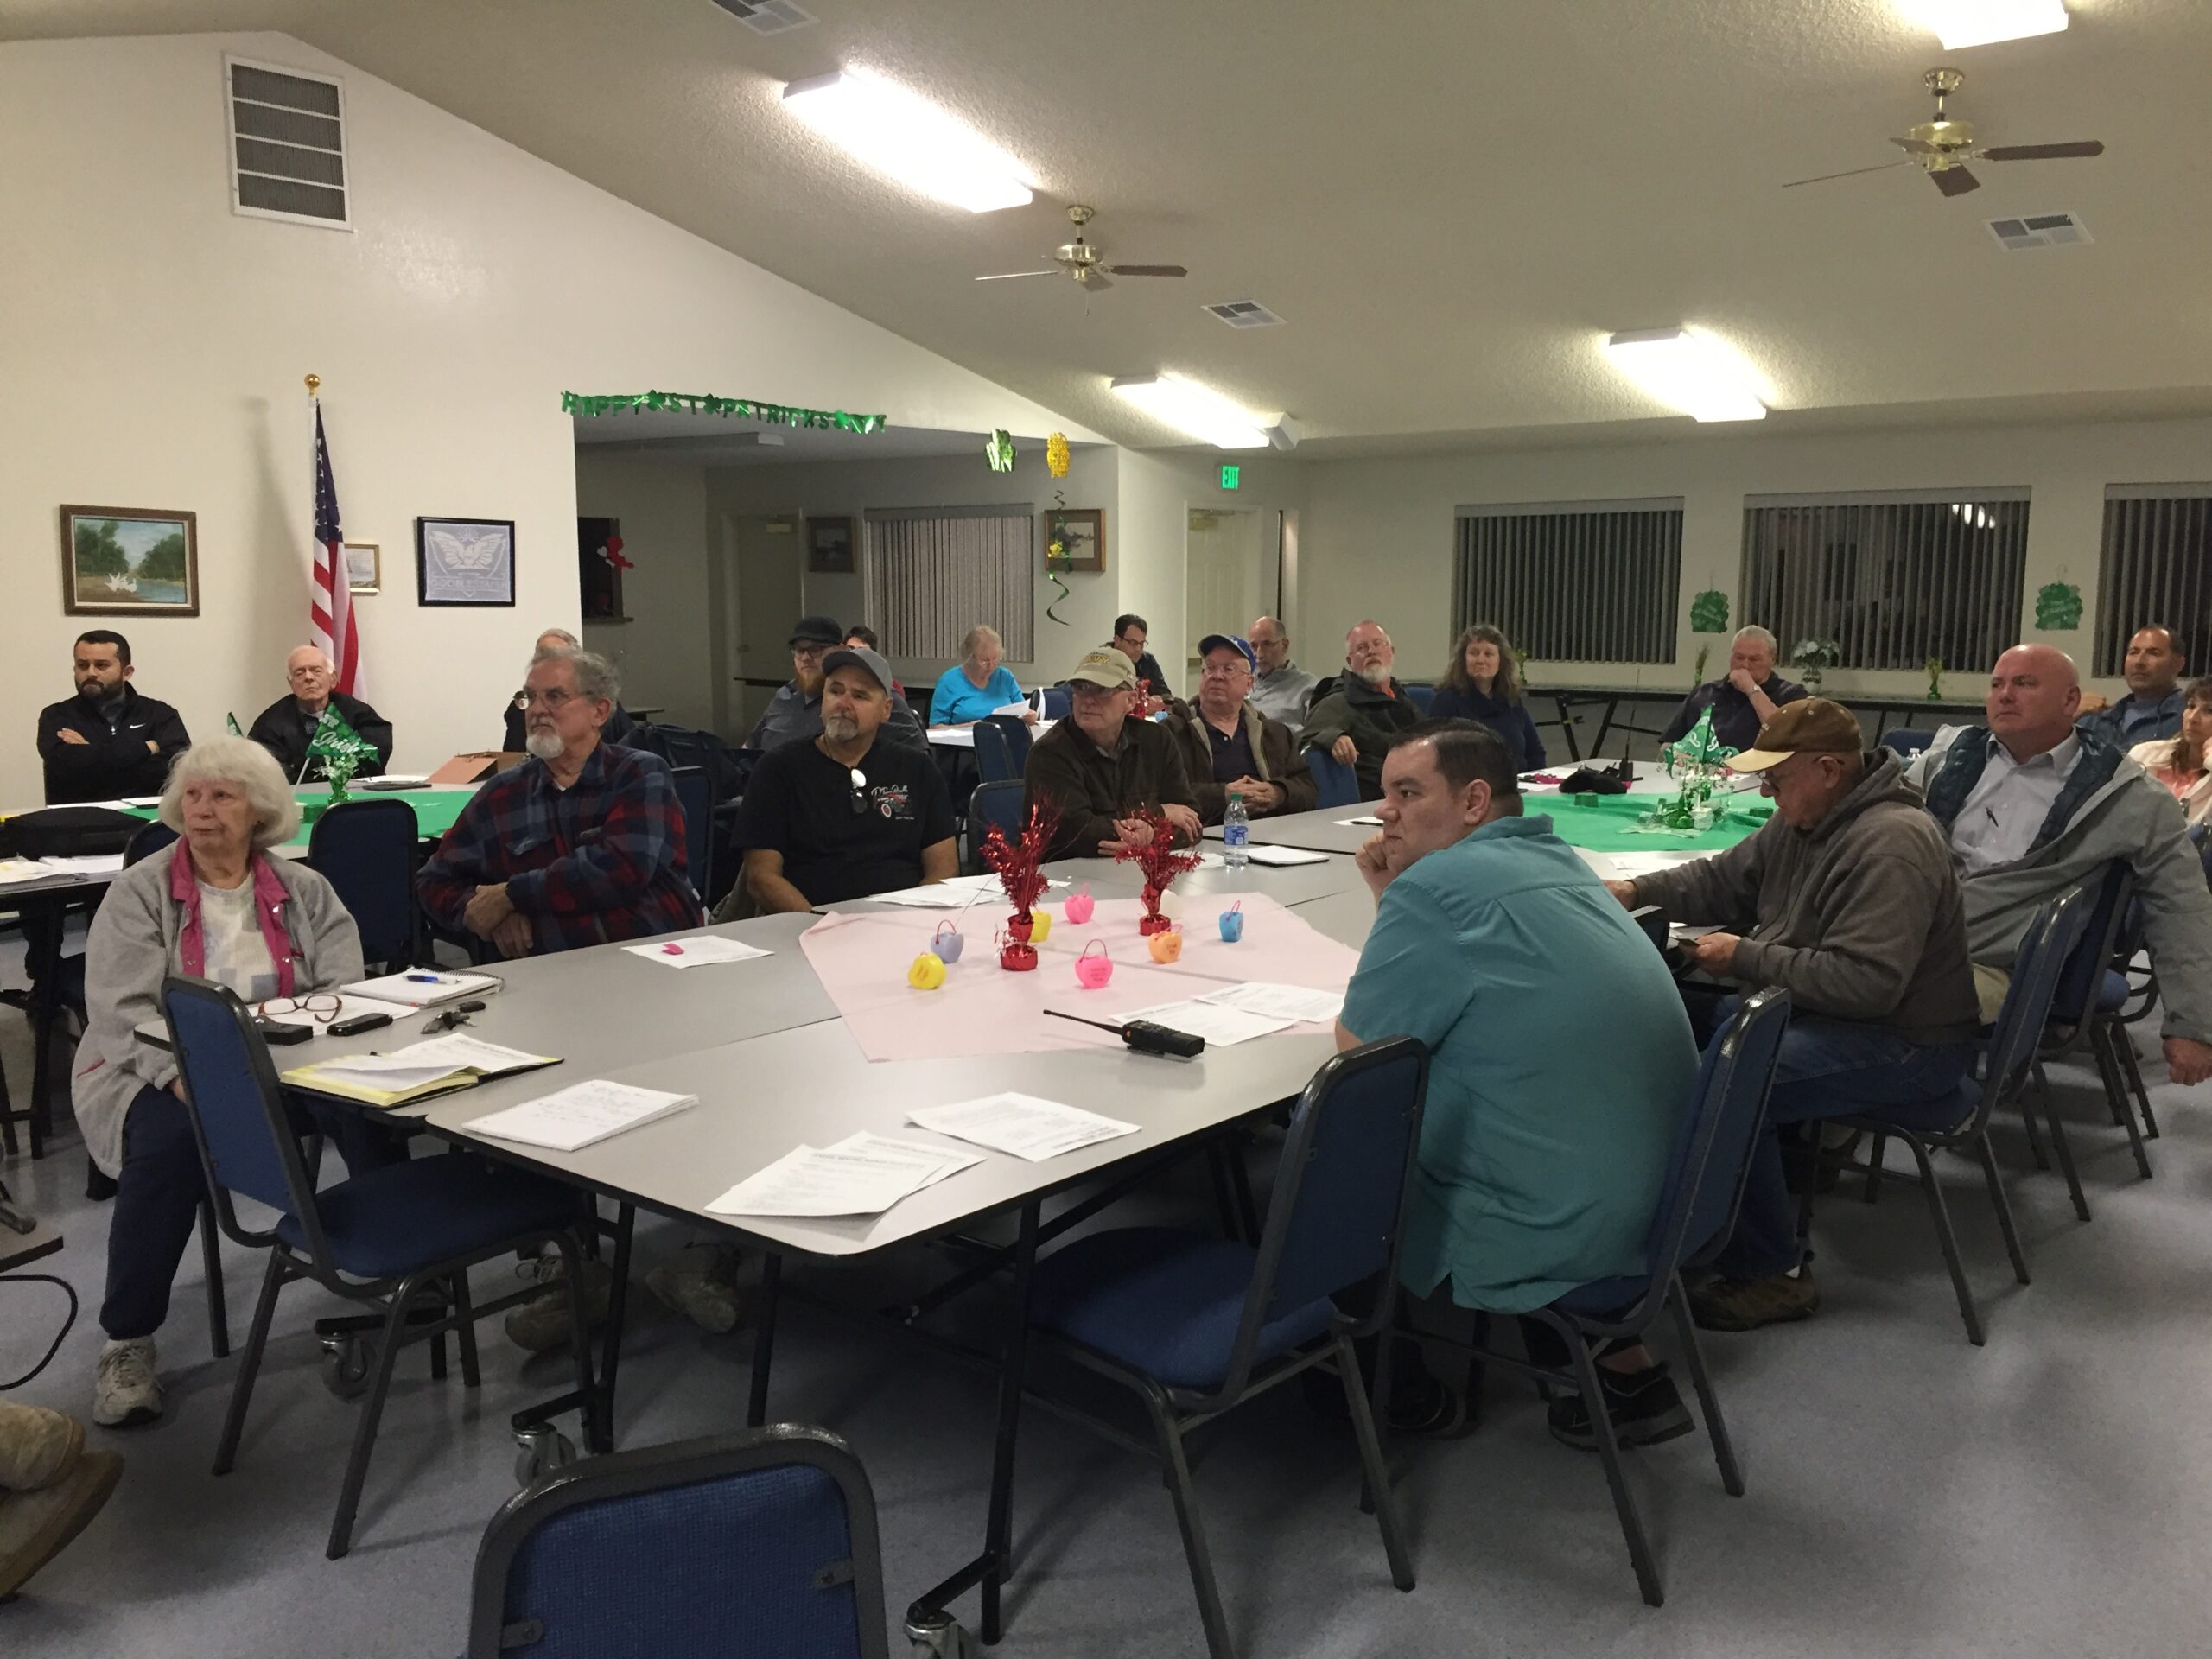 Tehachapi Amateur Radio Association's General Club Meeting (AC6EE) held on the 2nd Thursday of every month at 7:00pm in the Mountain Aire Estates.